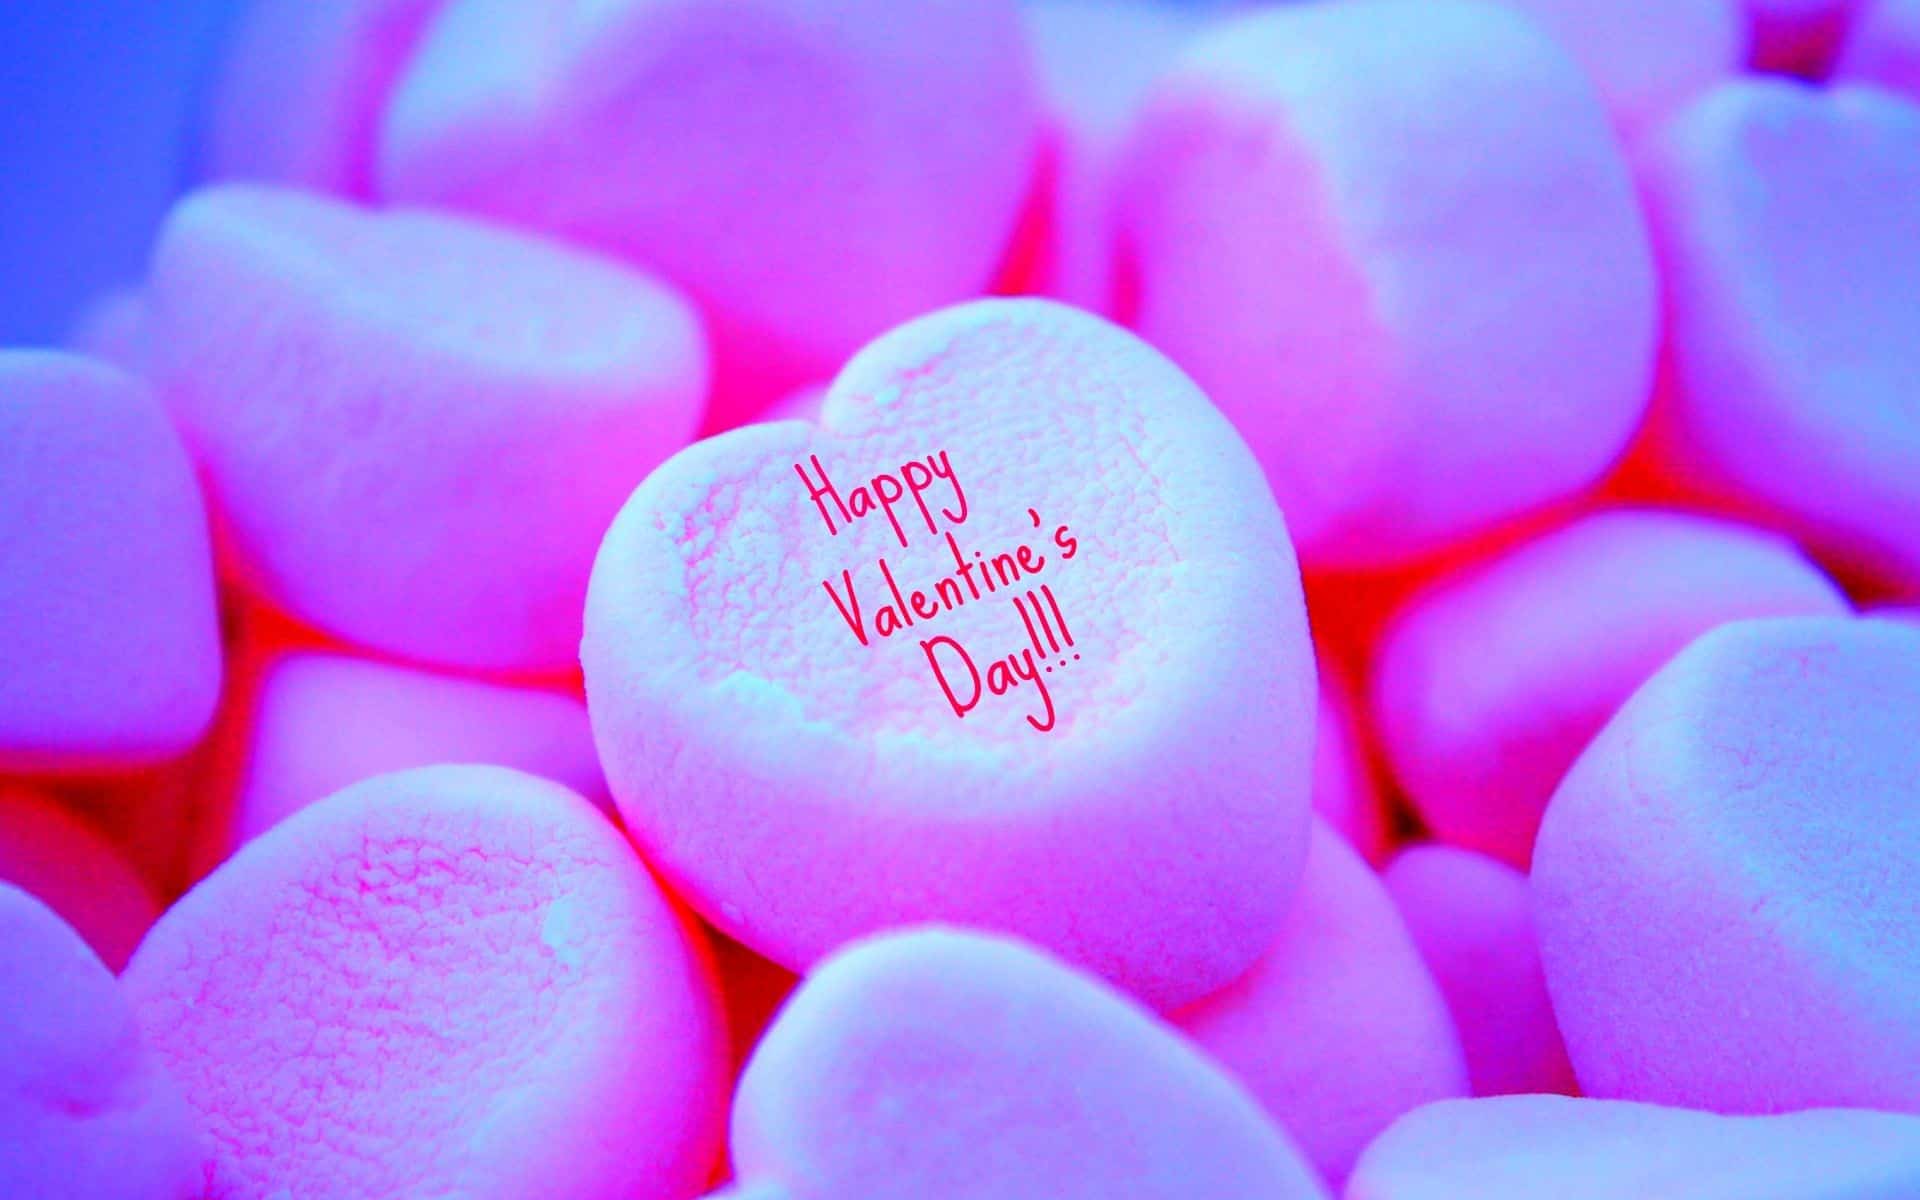 80+] Valentines Day Images 2023, Photo, Pic & Wallpaper (HD)